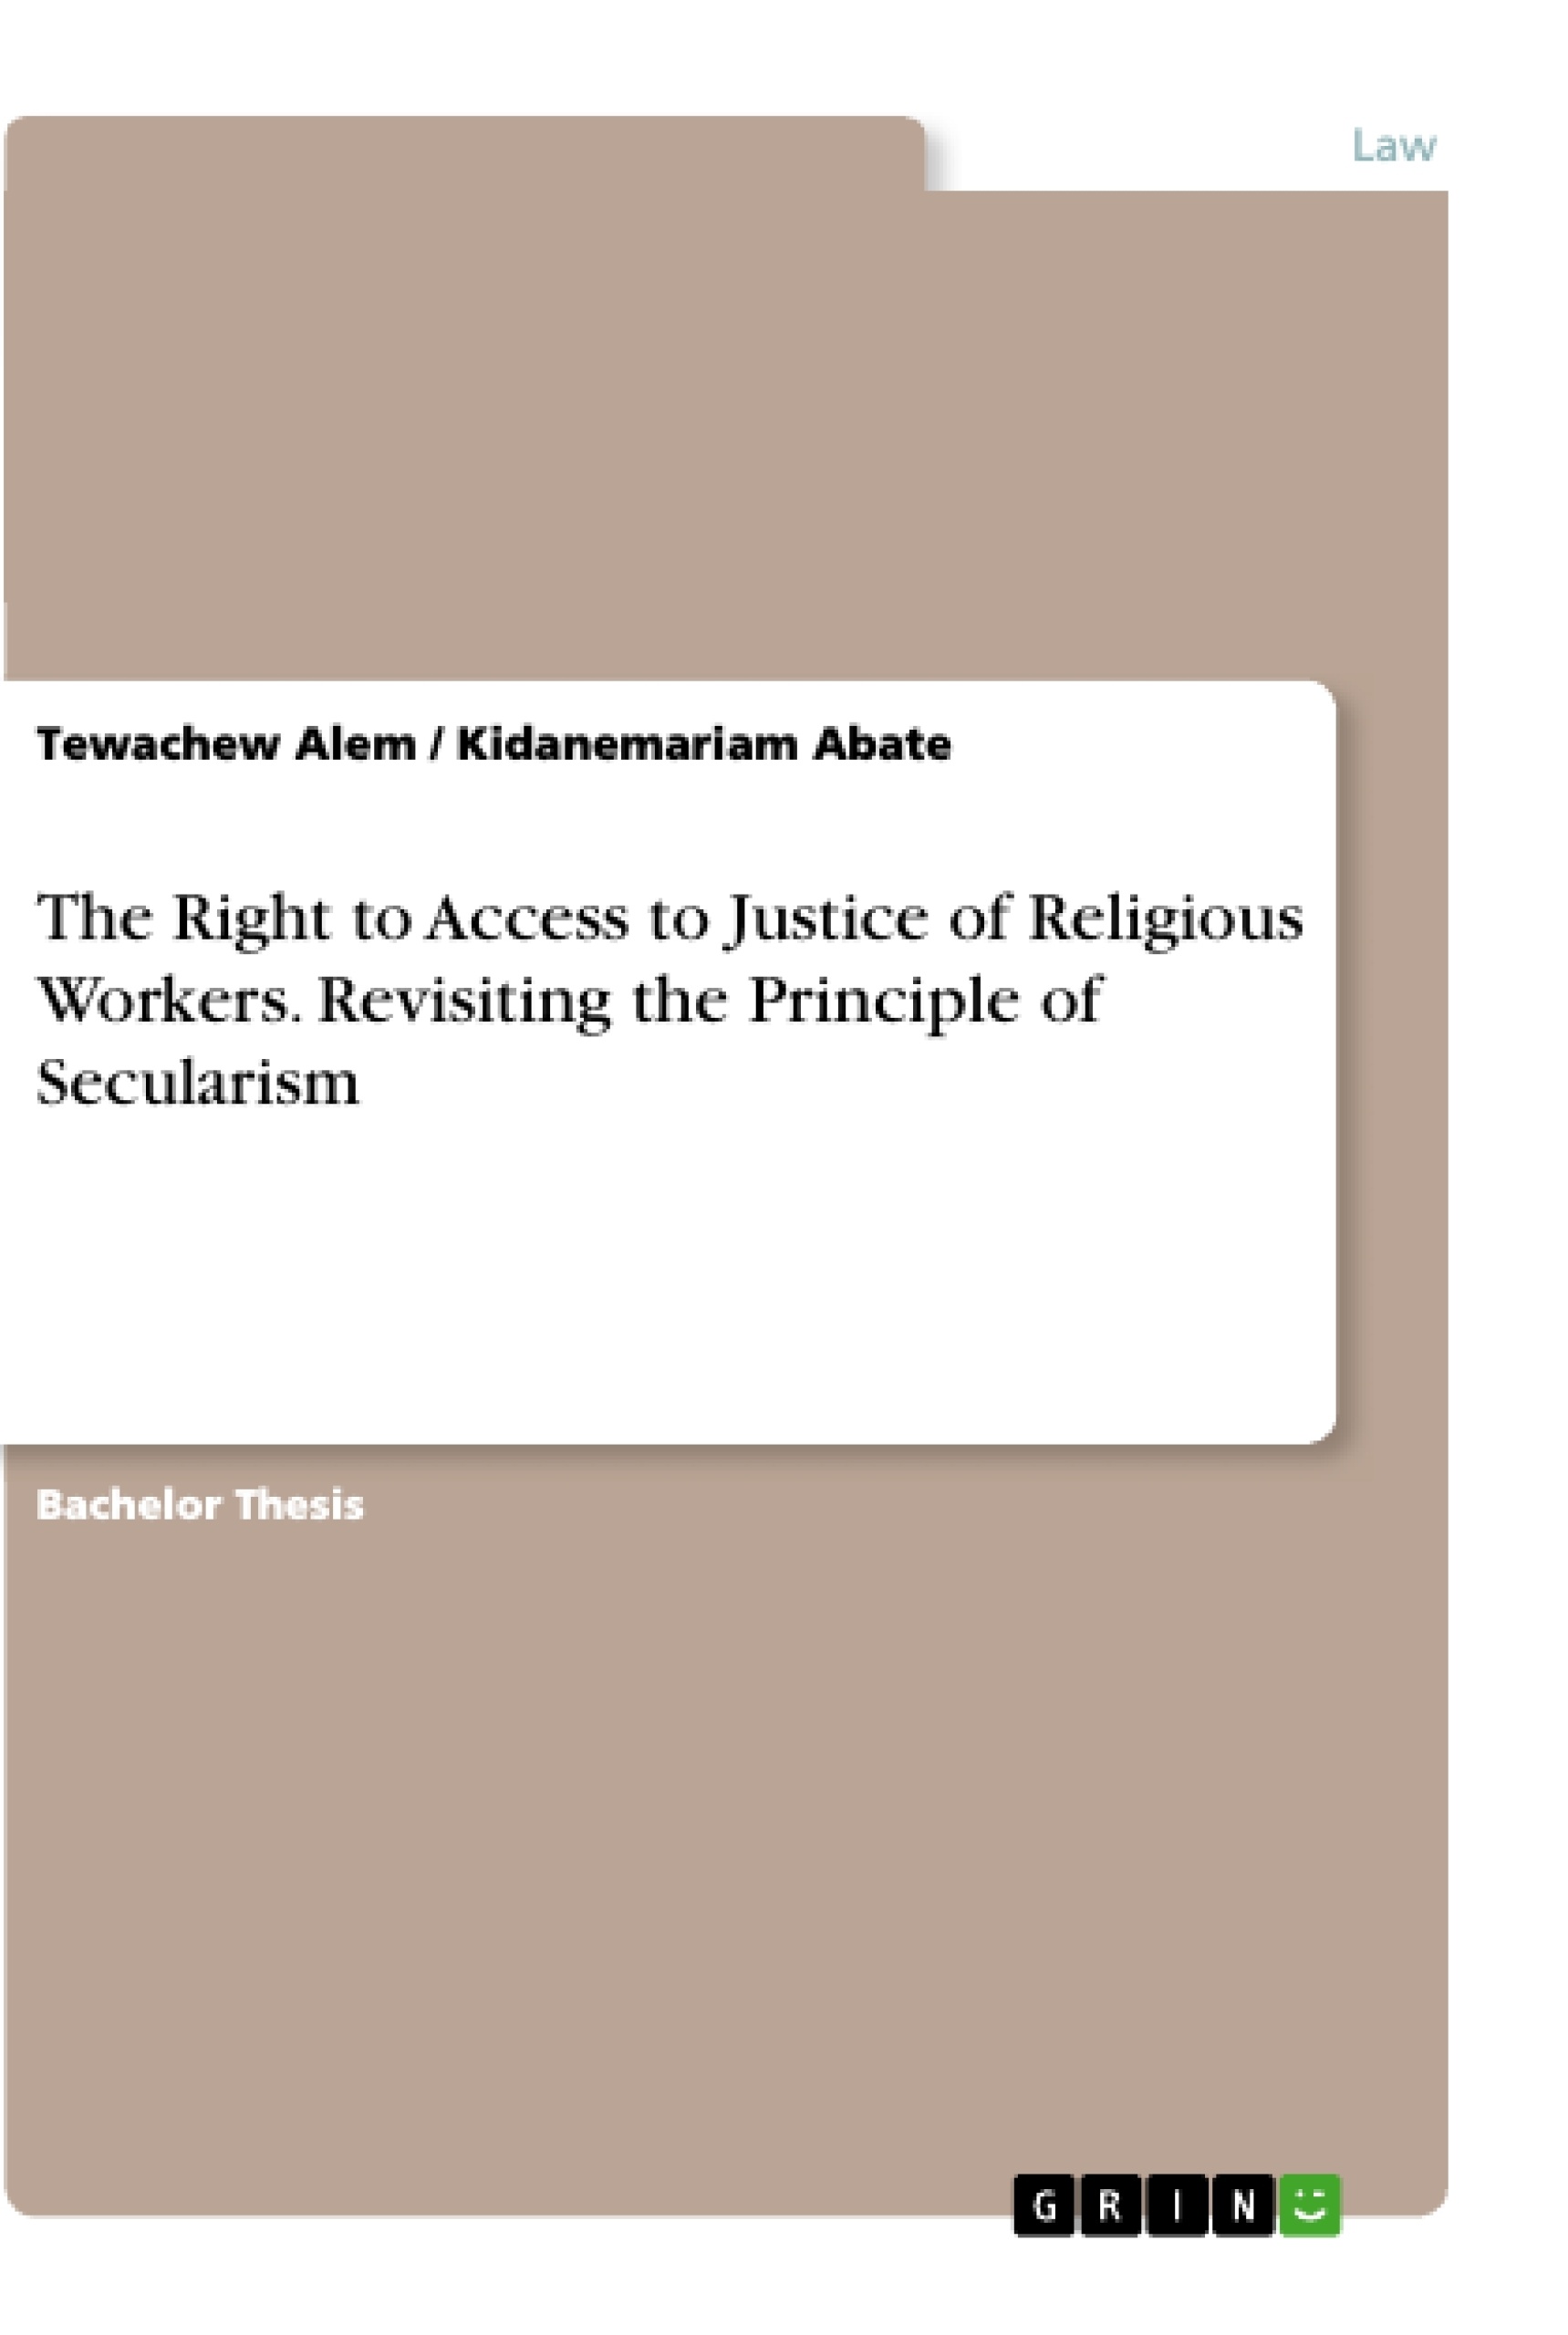 Title: The Right to Access to Justice of Religious Workers. Revisiting the Principle of Secularism